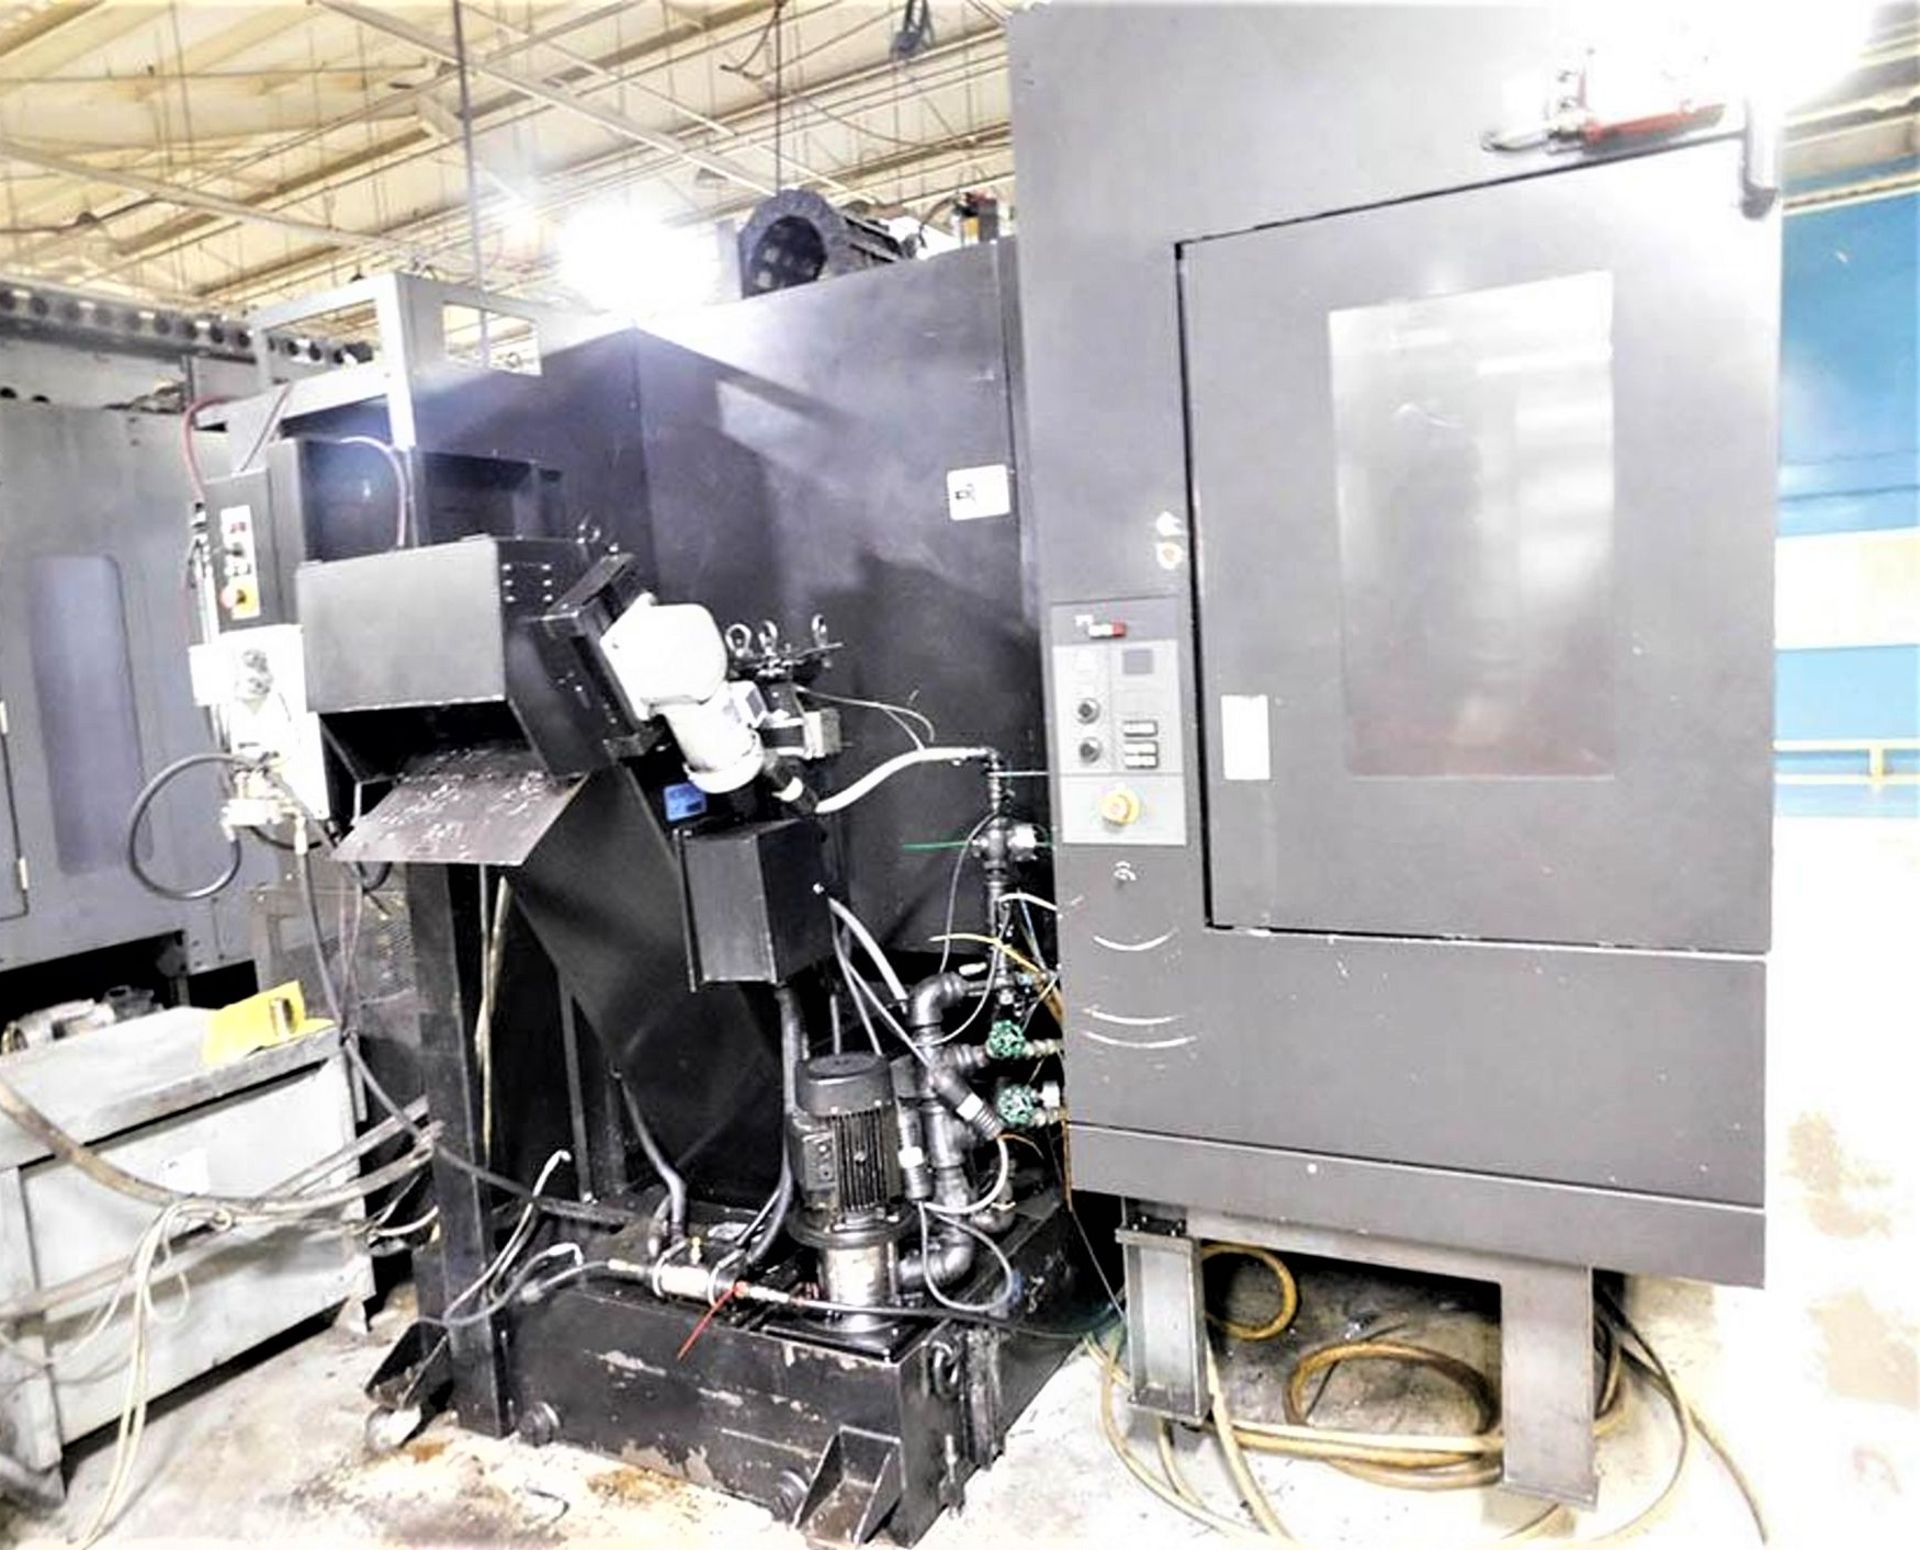 24.8" X 24.8" Pallets Toyoda FH630SX CNC 4-Axis Horizontal Machining Center, S/N NS1429, New 2006 - Image 7 of 10